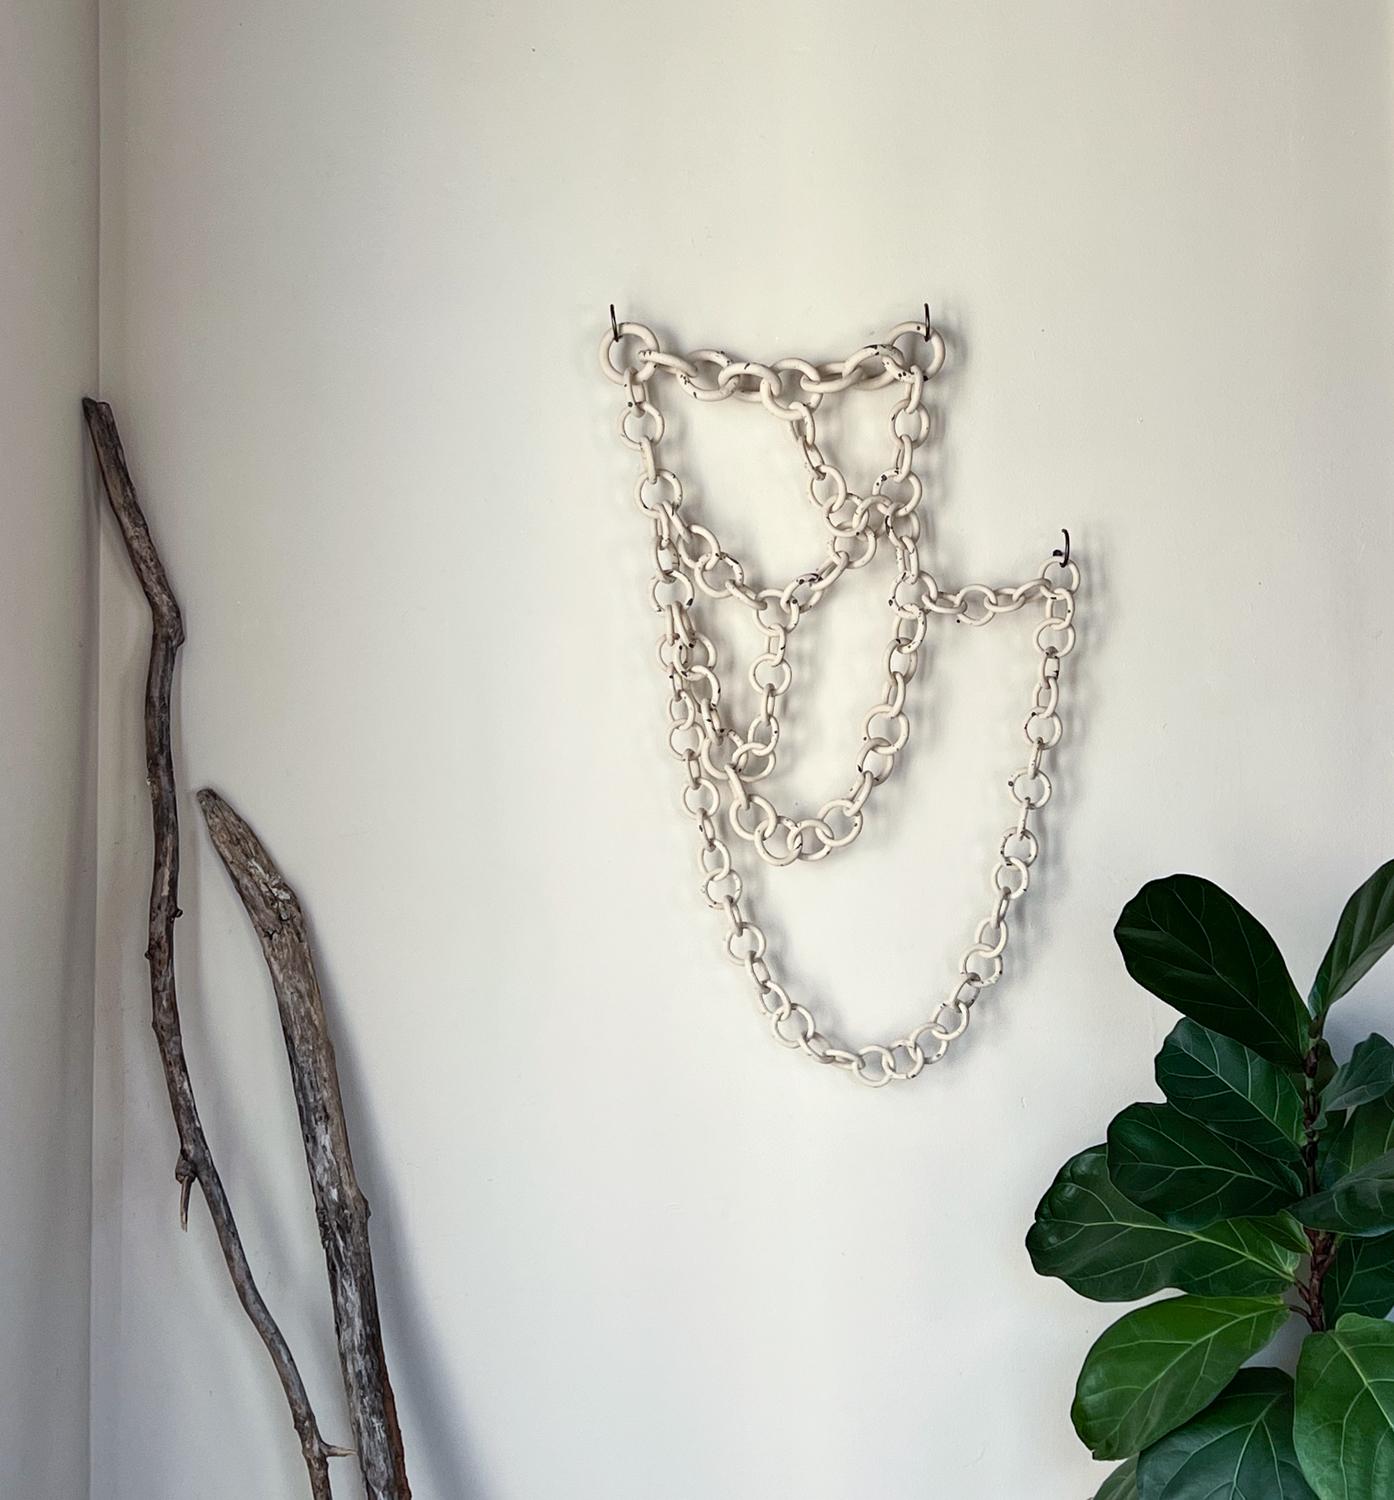 DIRECT MESSAGE ME FOR CUSTOM SIZES AND COLORS. ALL CUSTOM ORDERS TAKE 5-6 WEEKS TO SHIP.

This ceramic link chain wall hanging portrays a nomadic feel that embodies a sense of wanderlust and free-spiritedness. handbuilt from a white stoneware clay